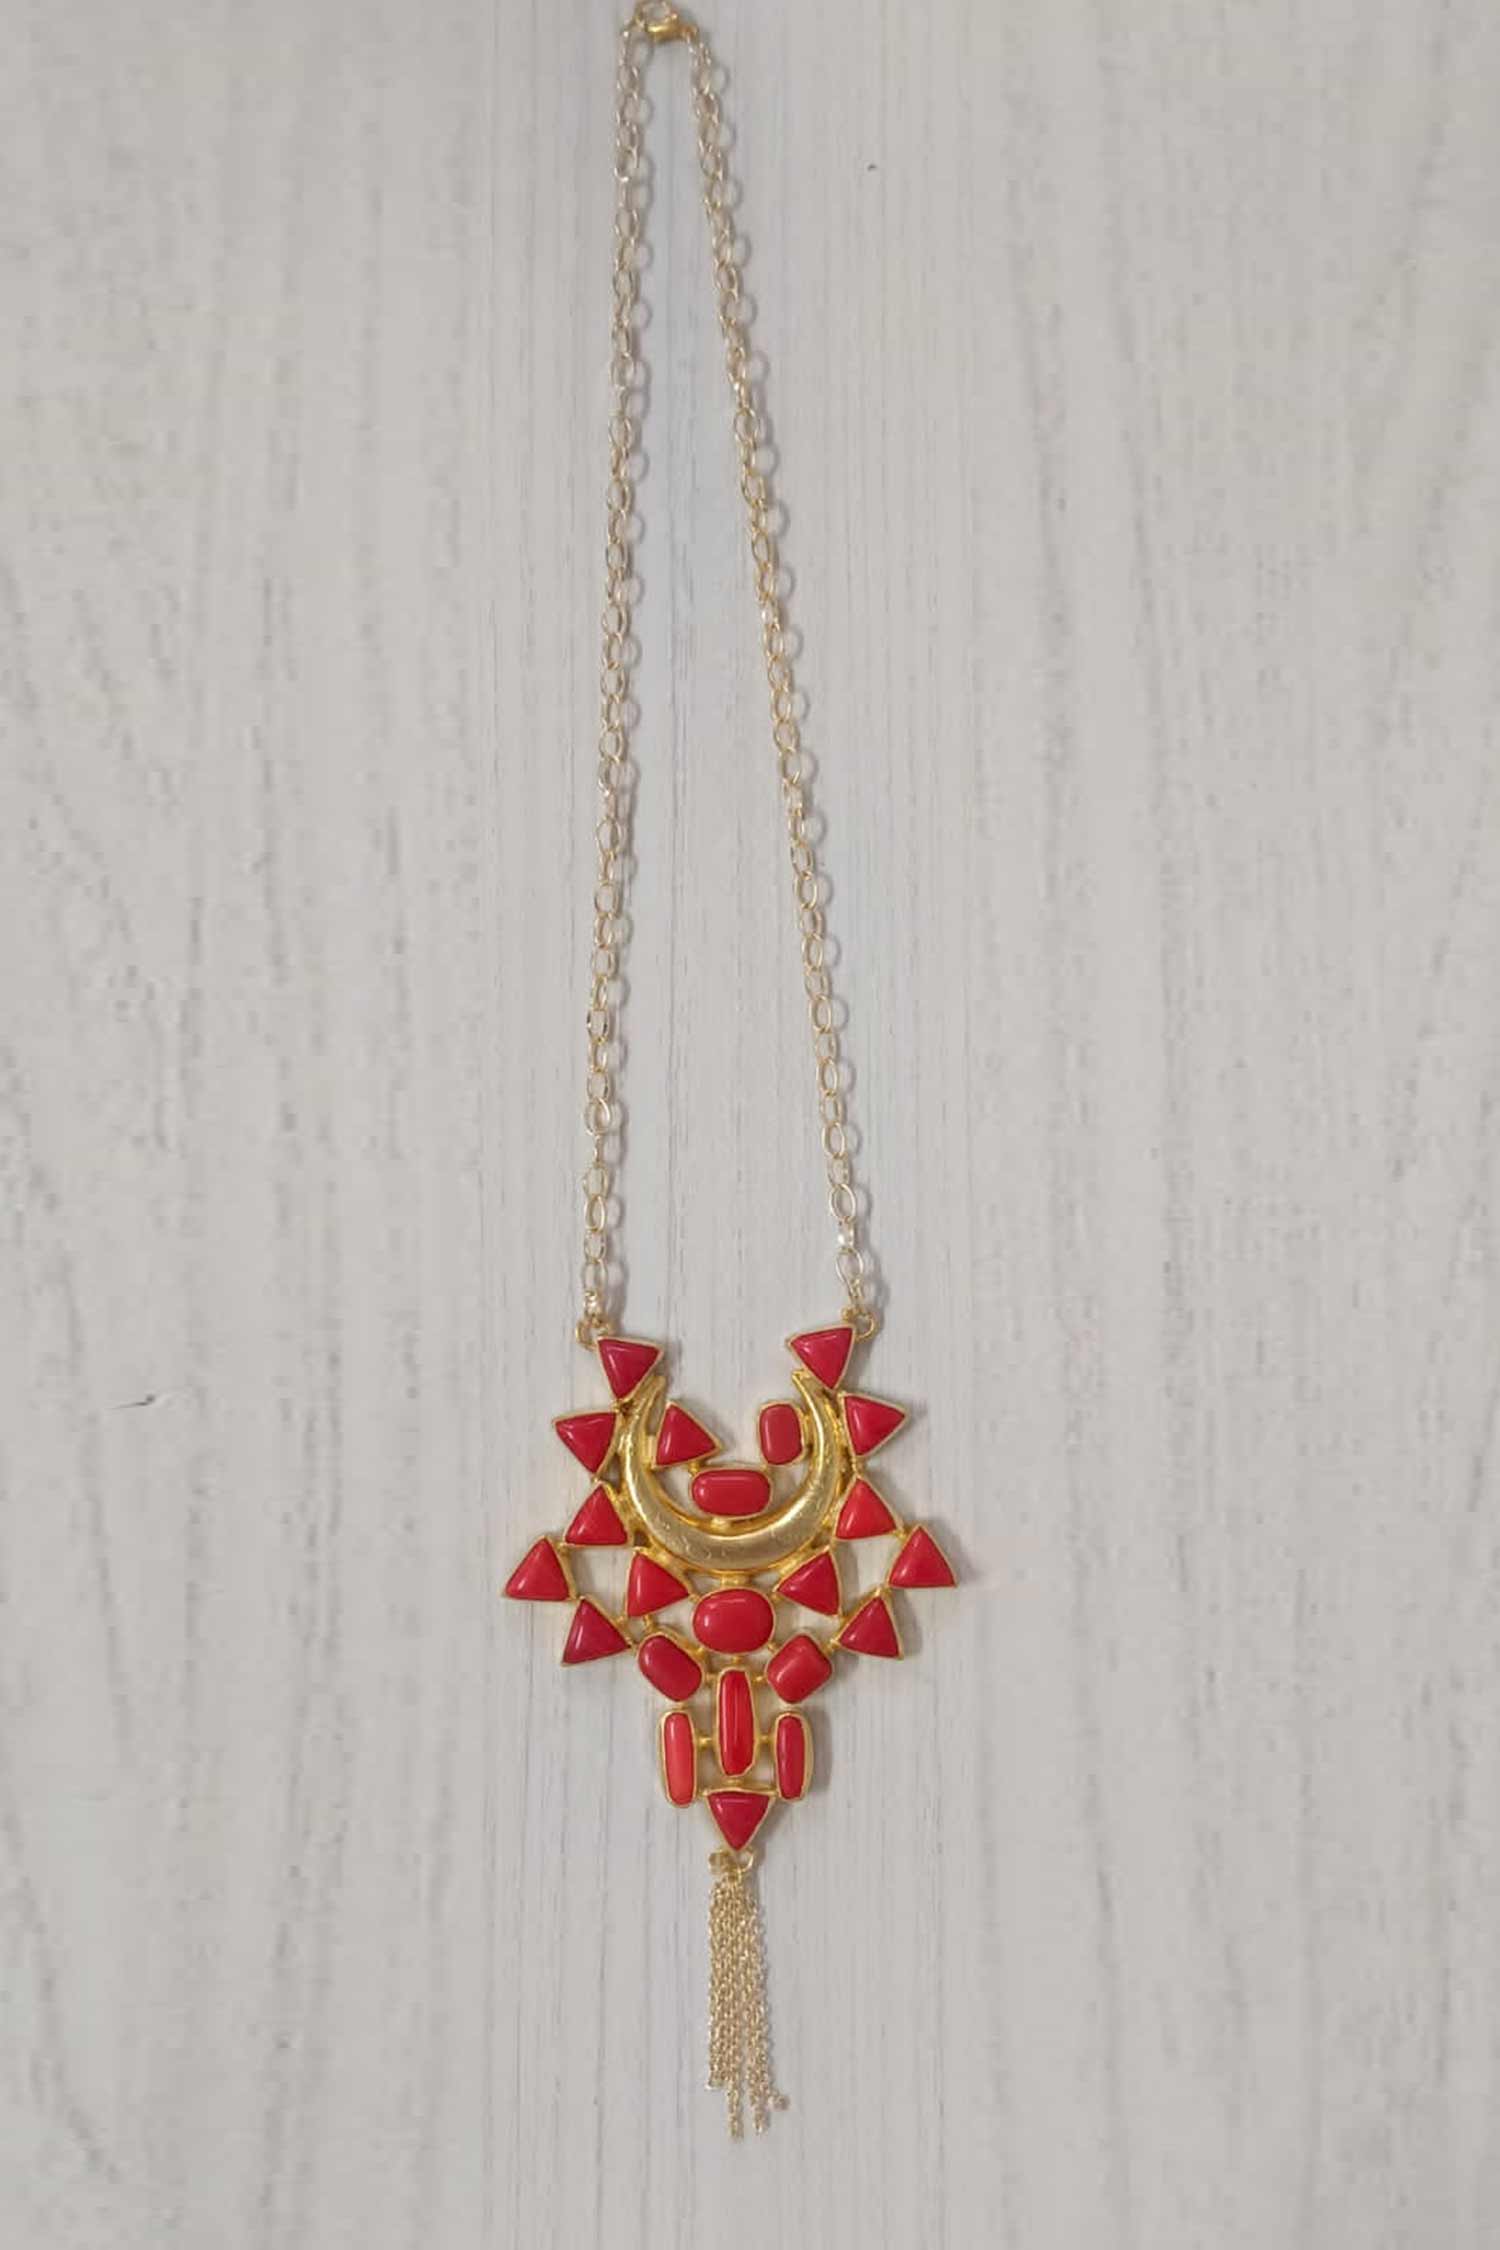 Red & Golden Necklace